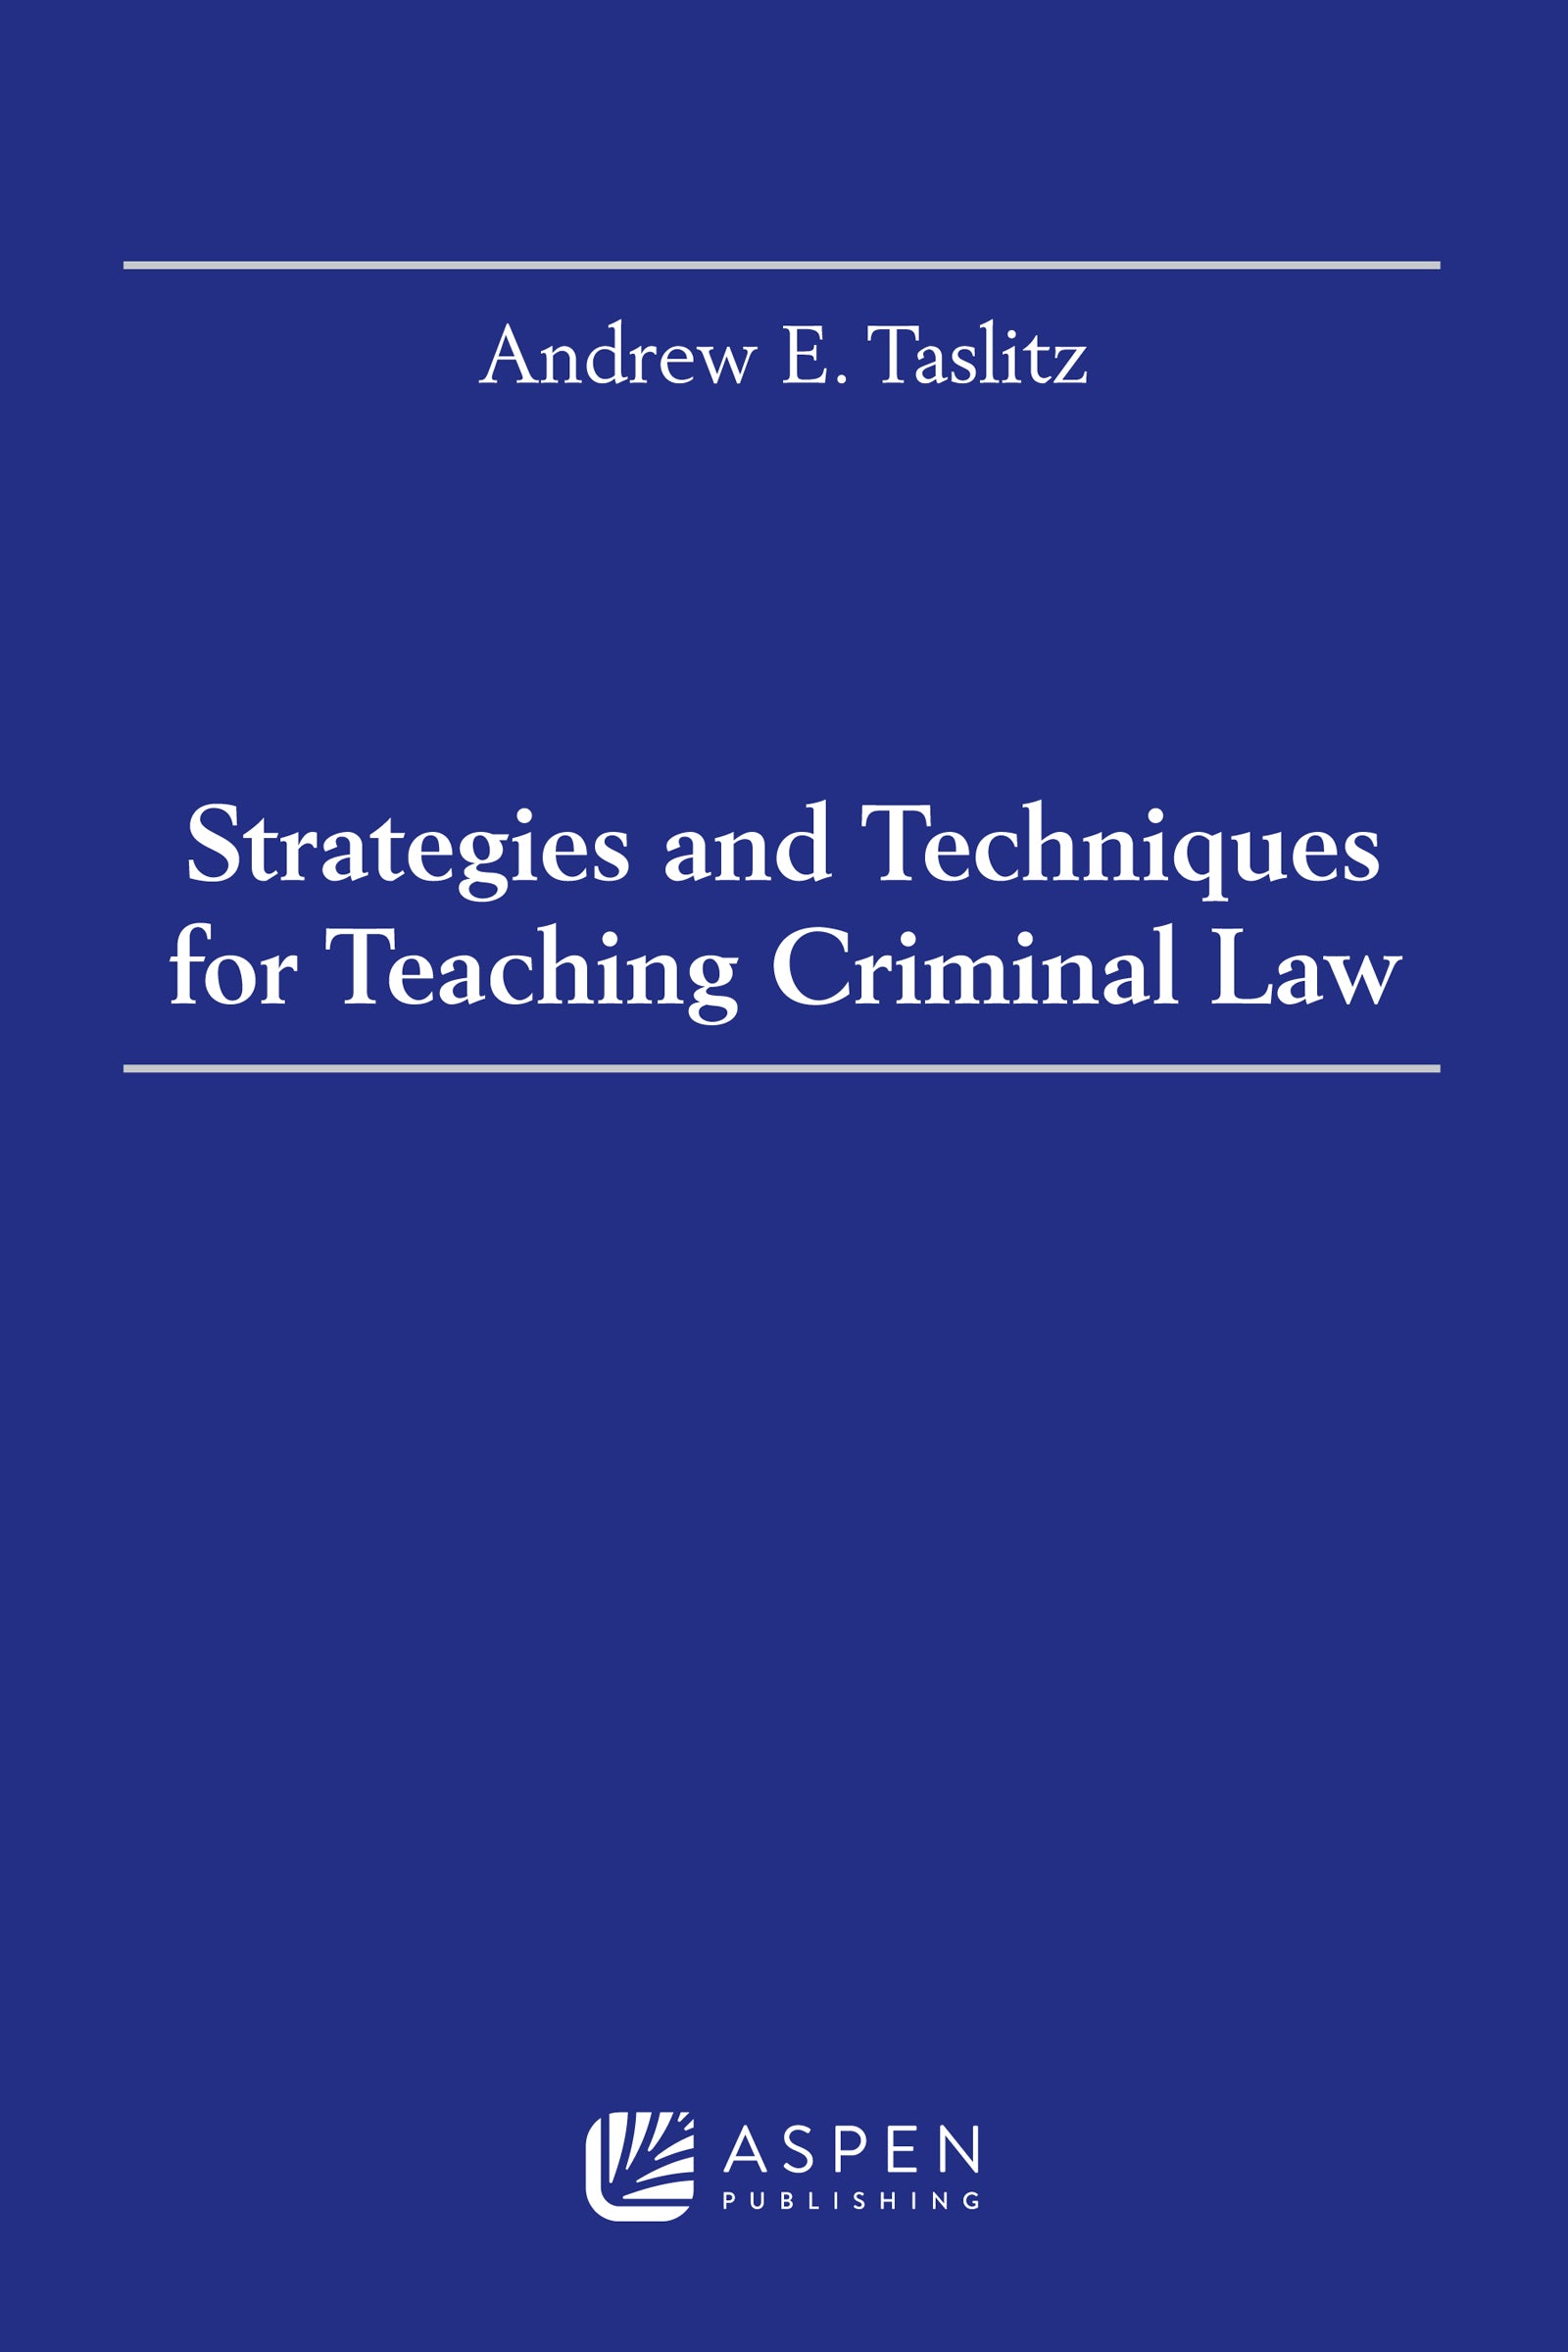 Strategies and Techniques for Teaching Criminal Law